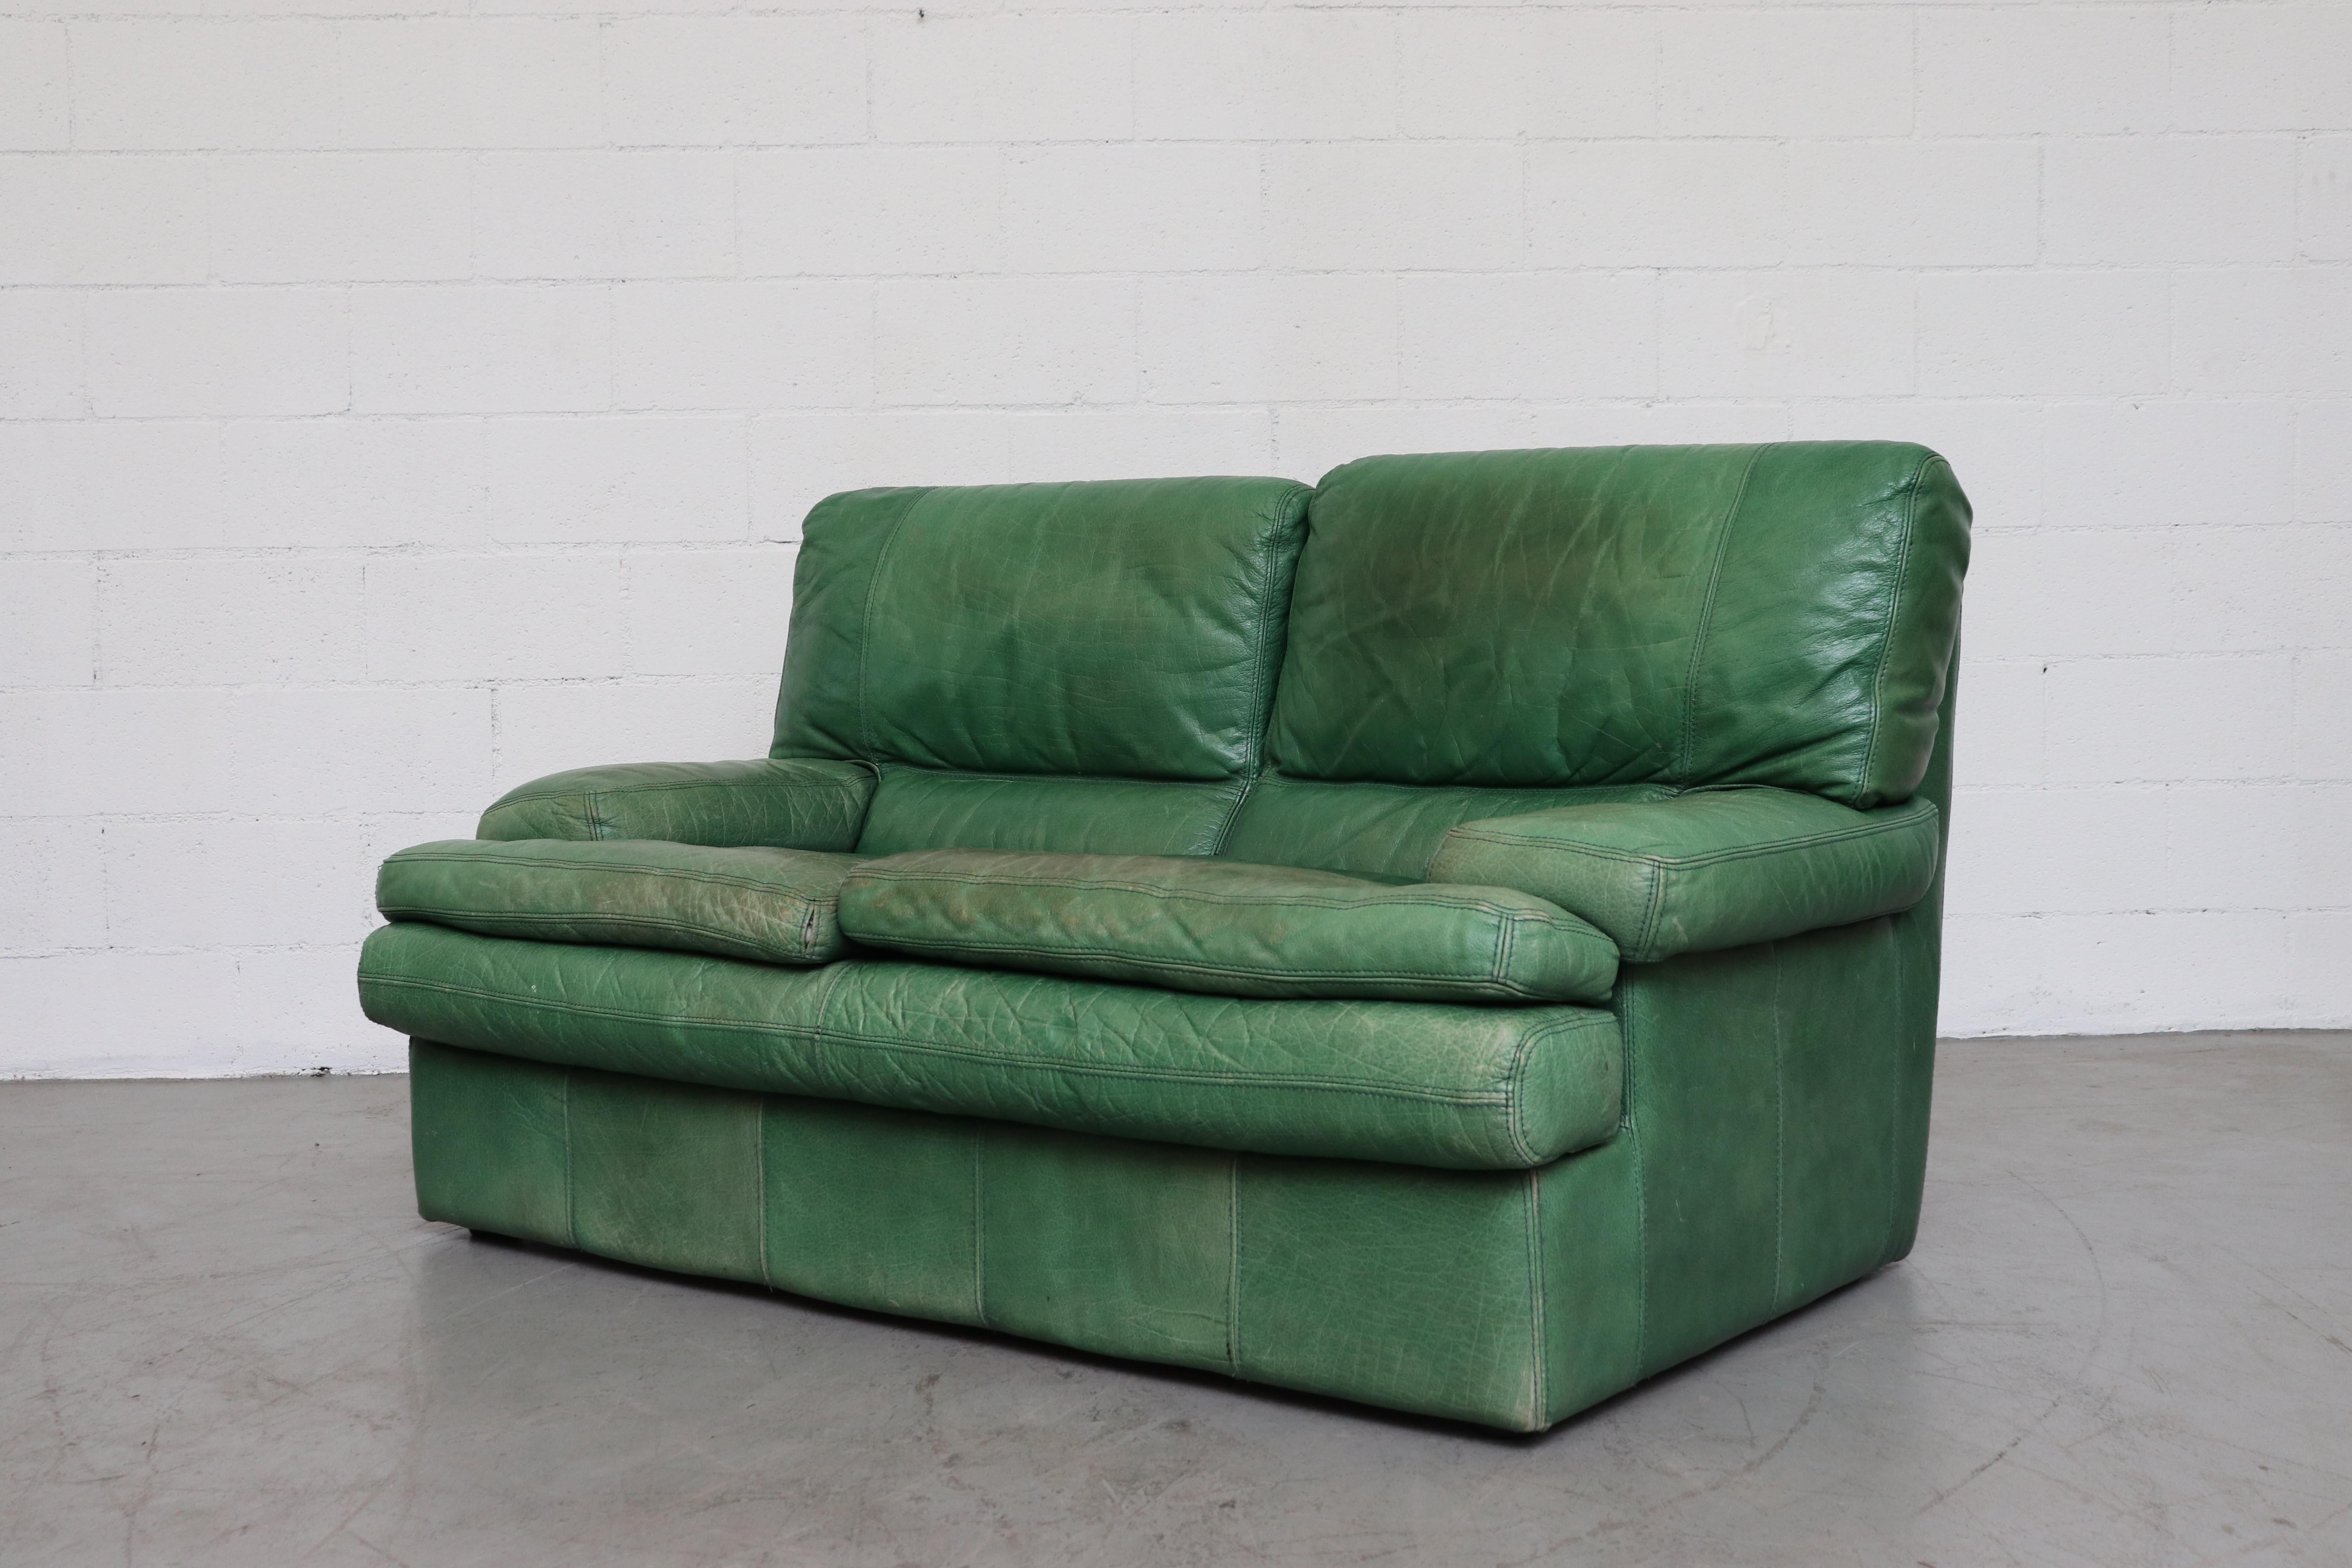 Kelly green leather love seat sofa. Well worn with visible wear and patina. In original condition with wear consistent with age and use.